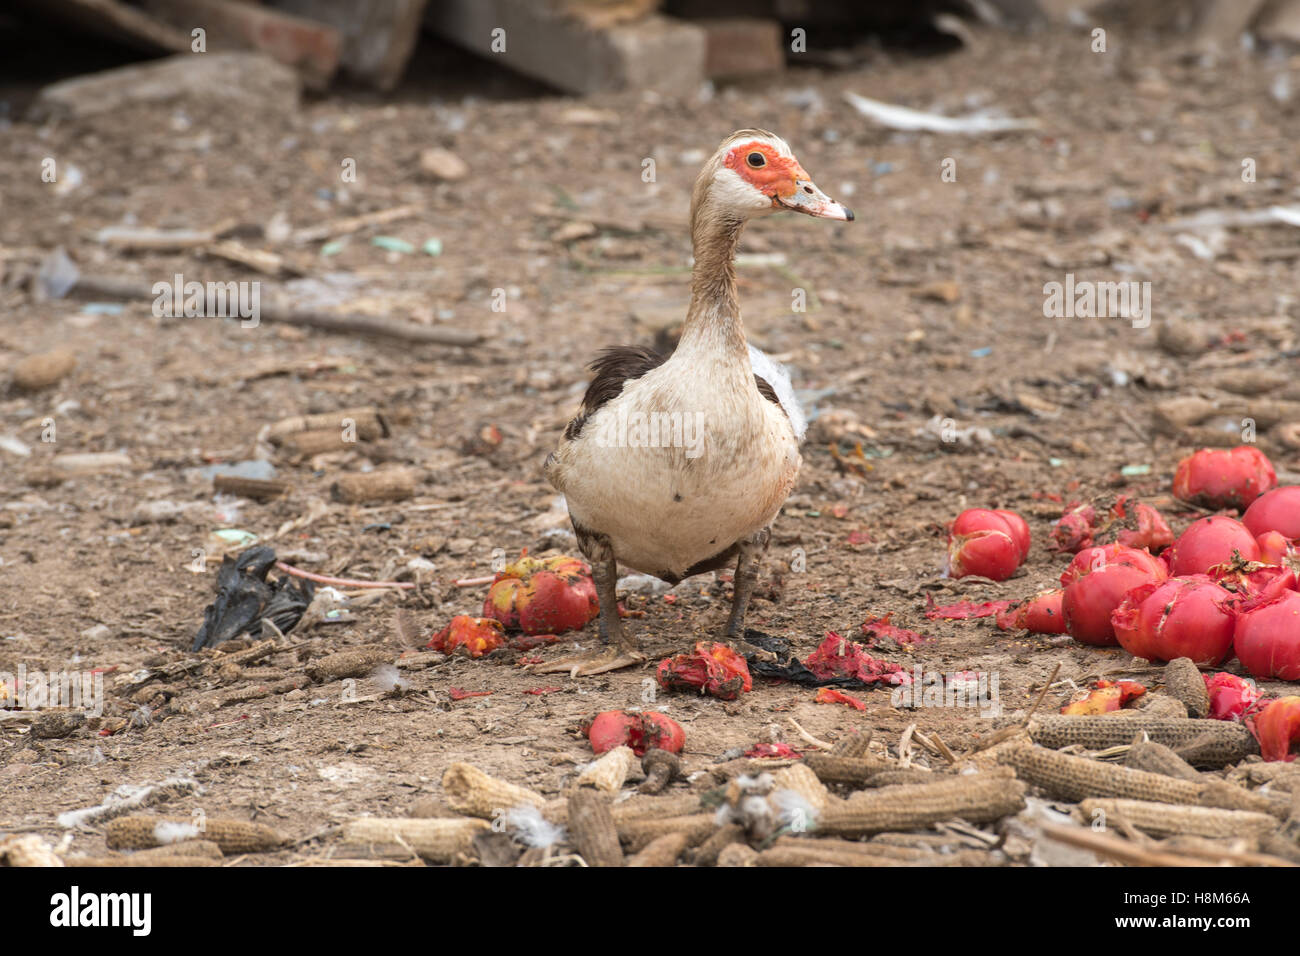 Beijing, China - A domesticated Chinese duck on a farm near Beijing, China. Stock Photo